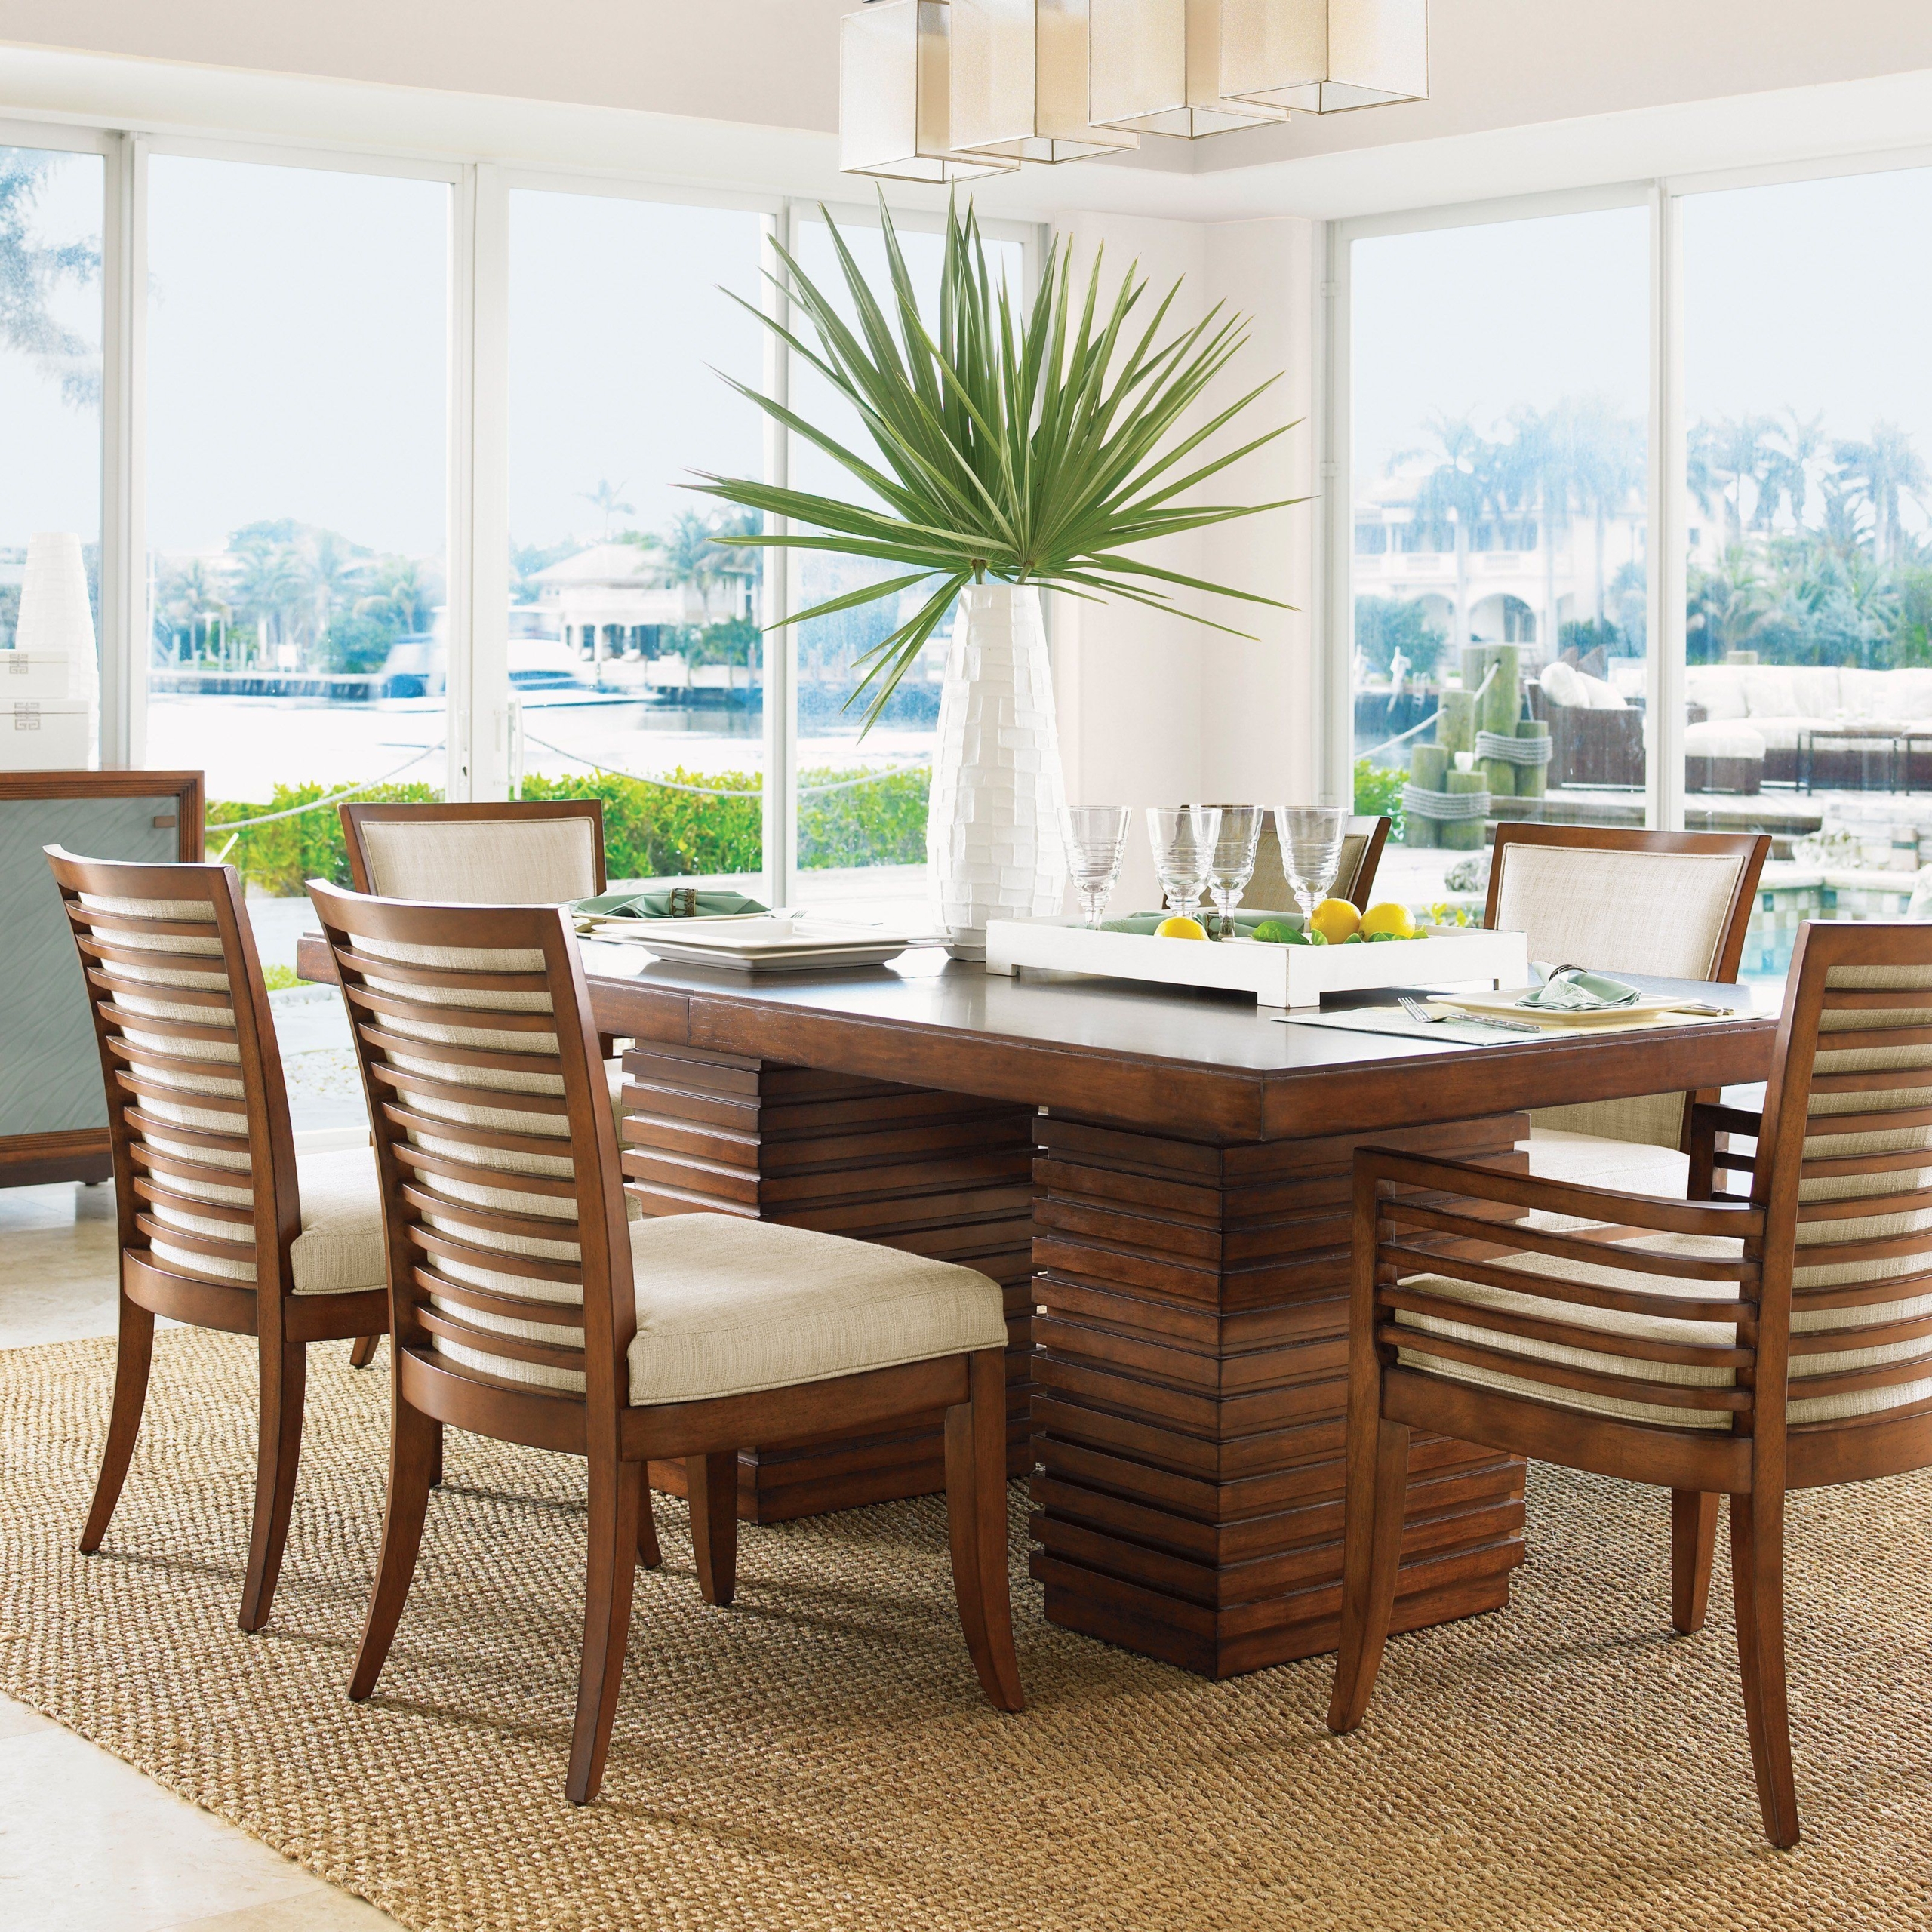 Tommy bahama dining room chairs